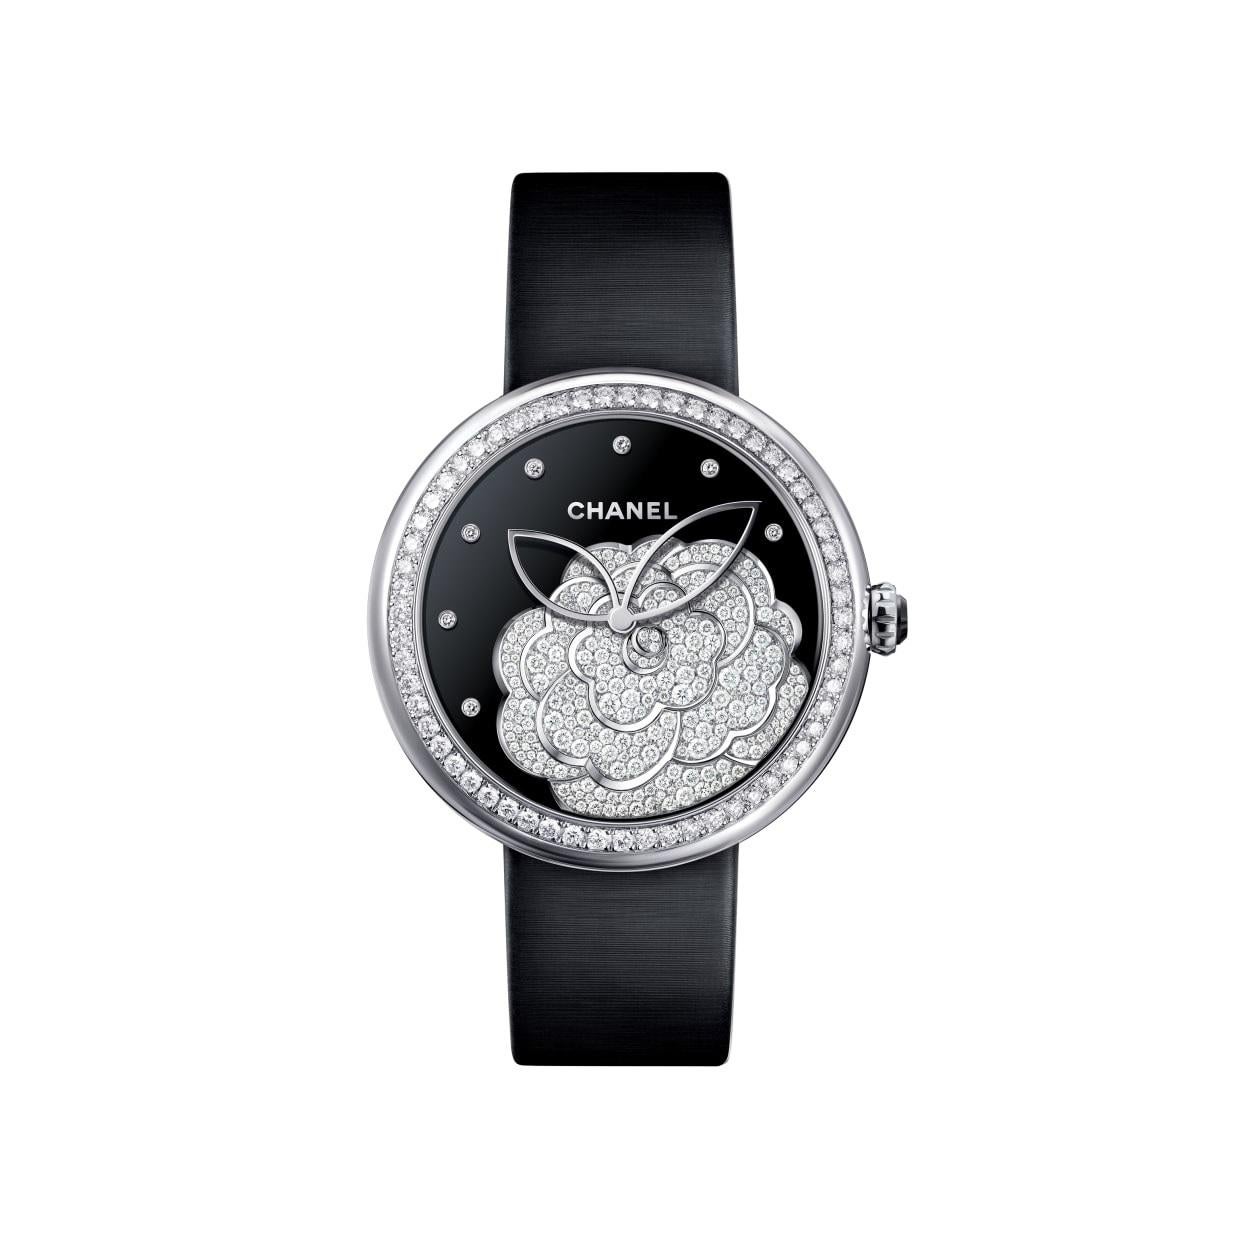 mademoiselle prive chanel watch